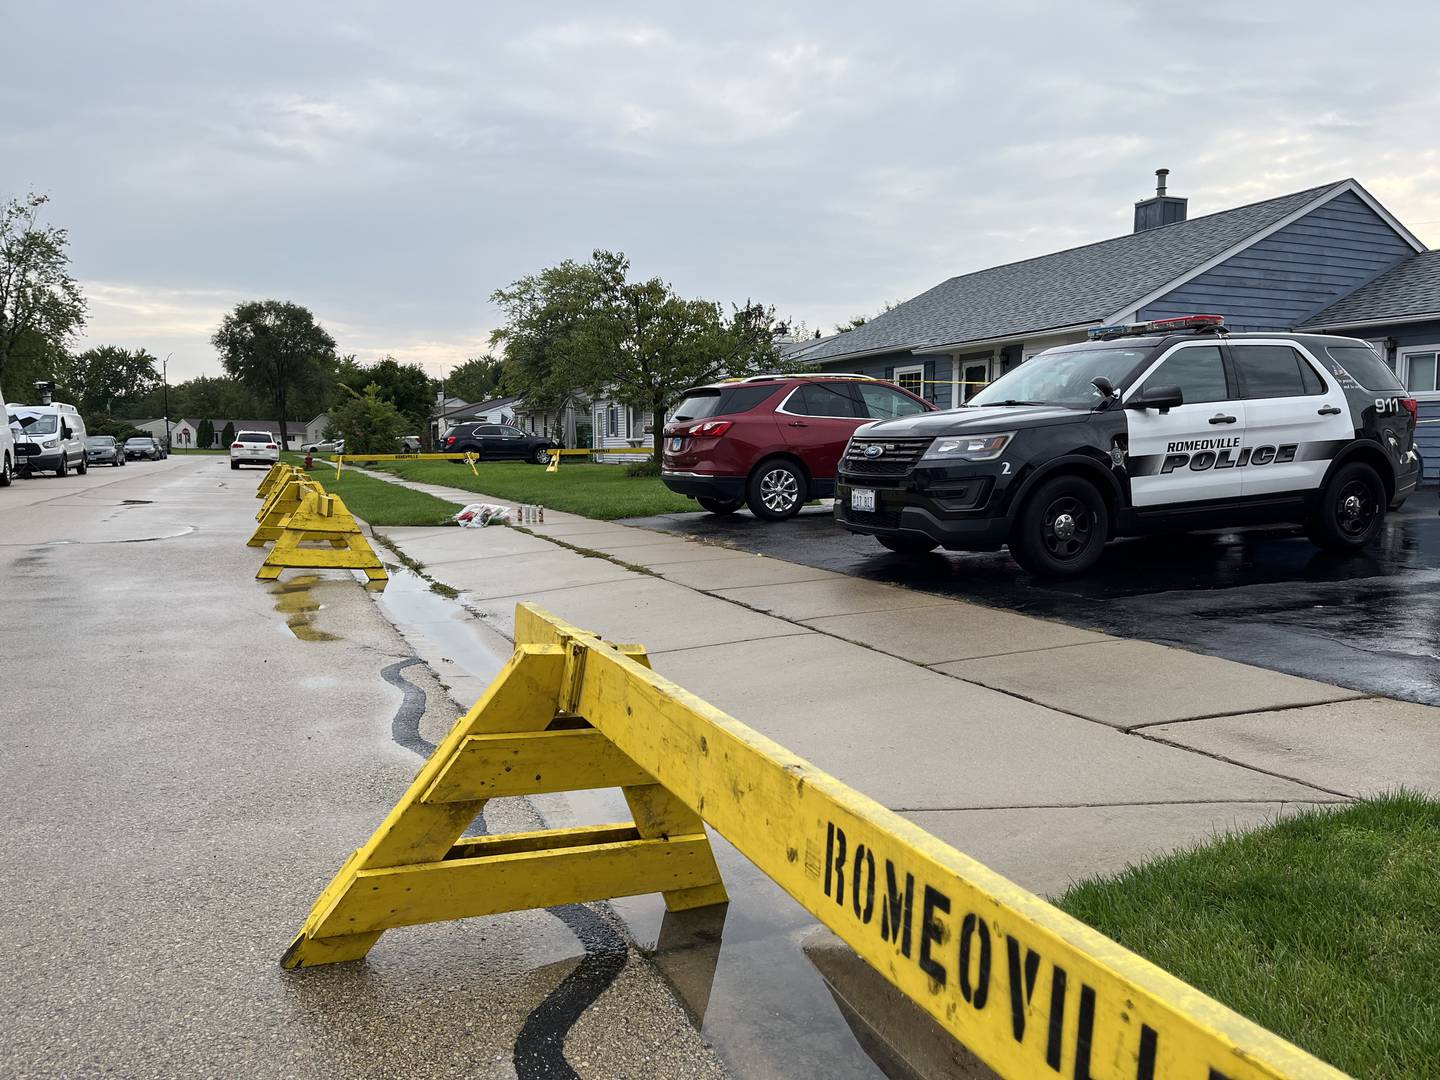 A Romeoville police squad vehicle is seen on Tuesday, Sept. 19, 2023, in the driveway of a residence in the 500 block of Concord Avenue in Romeoville. On Sunday, Sept. 17, officers discovered the bodies of Alberto Rolon, 38, Zoraida Bartolomei, 32, and their two sons, ages 7 and 9, inside the residence. Police are investigating their deaths as homicides.